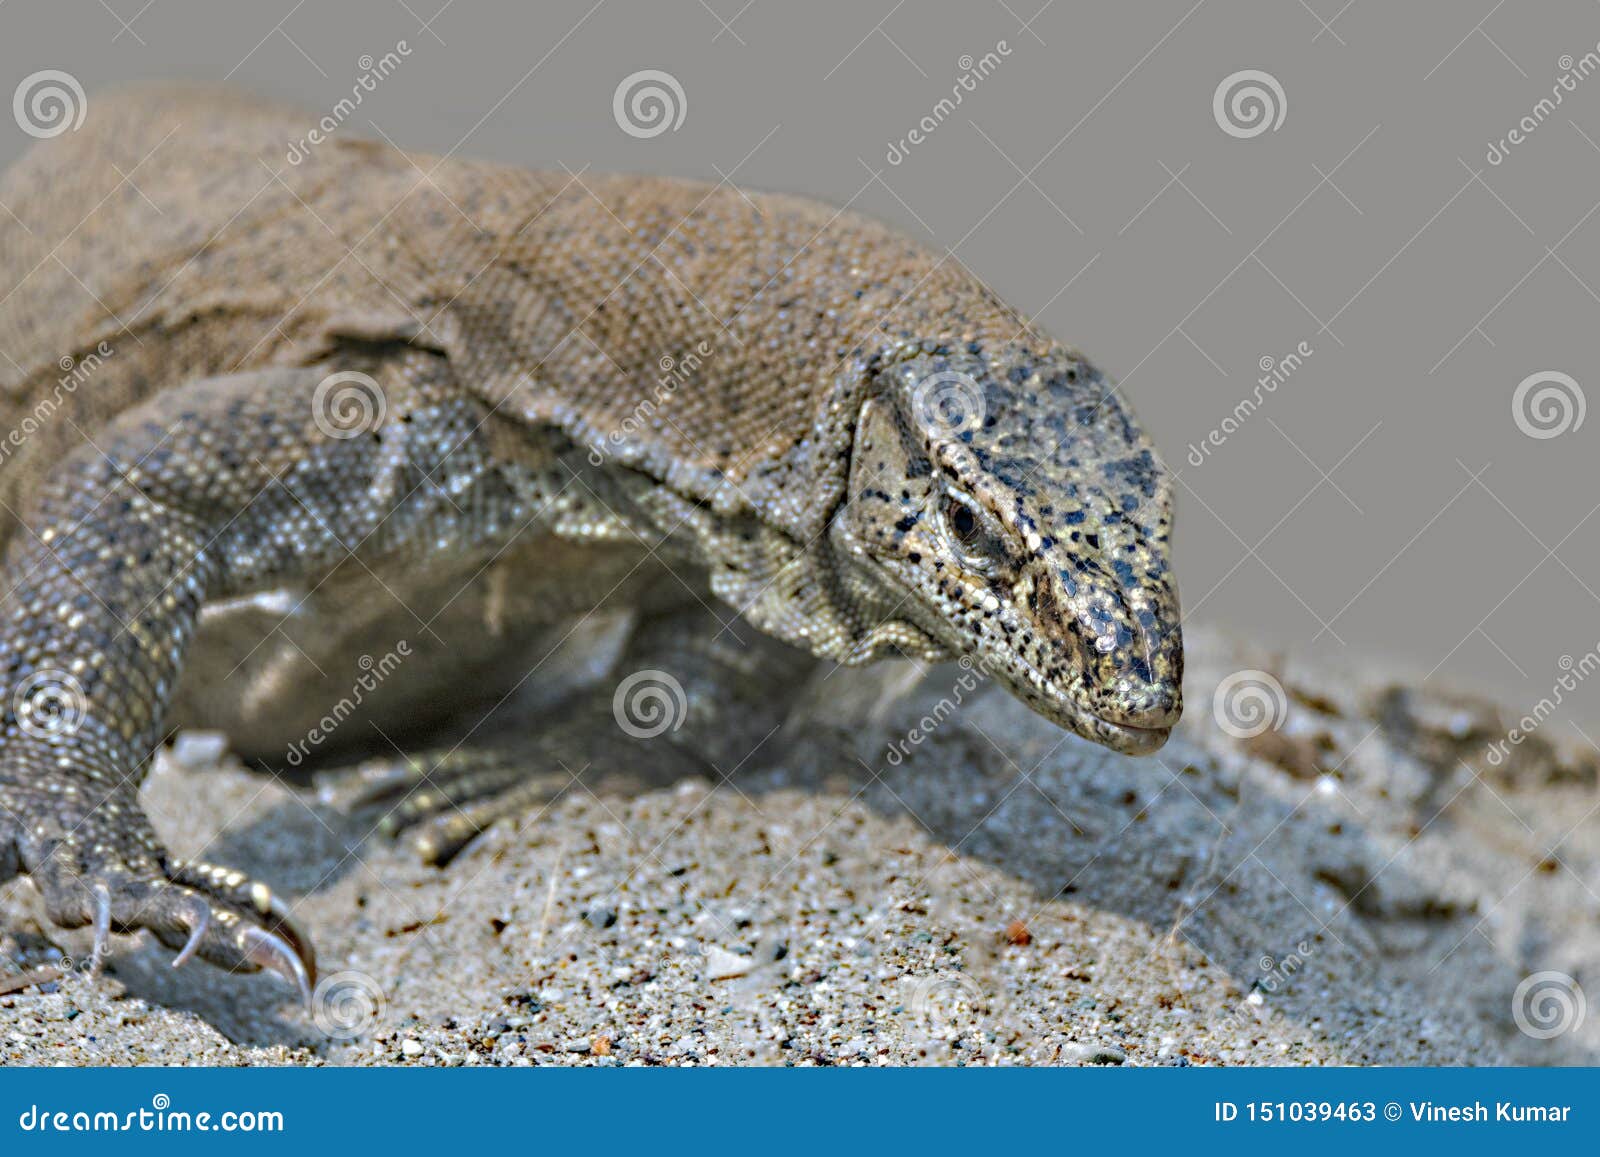 Monitor Lizard Perching On Forest Floor In Search Of Prey Stock